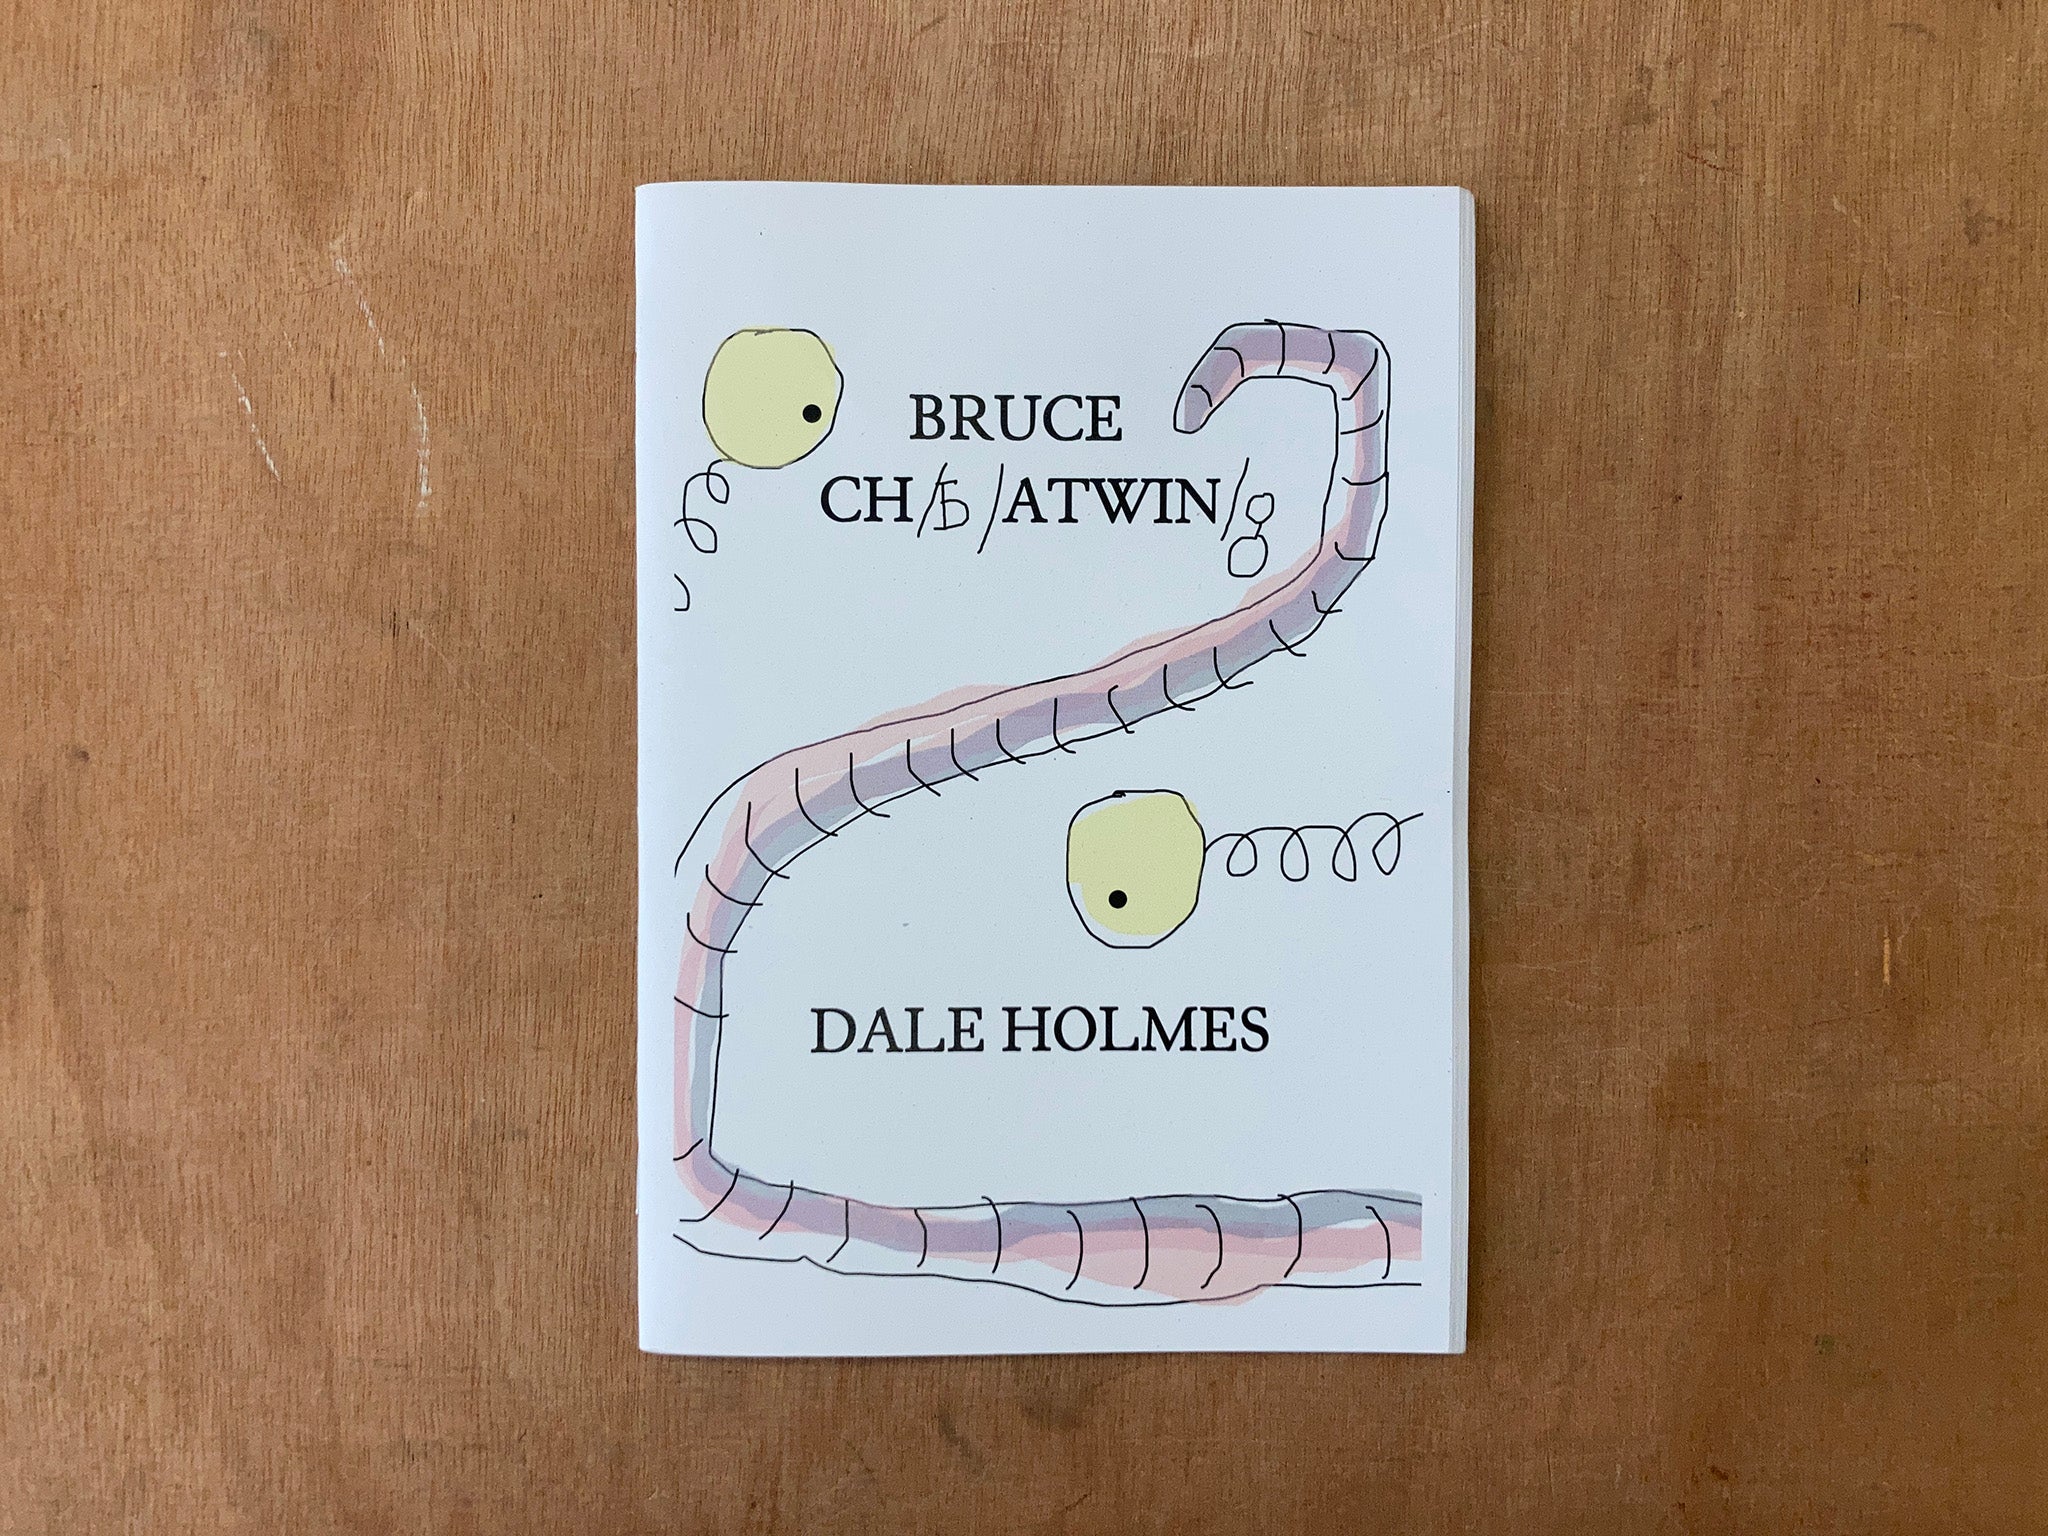 BRUCE CH(b)ATWIN(g) by Dale Holmes